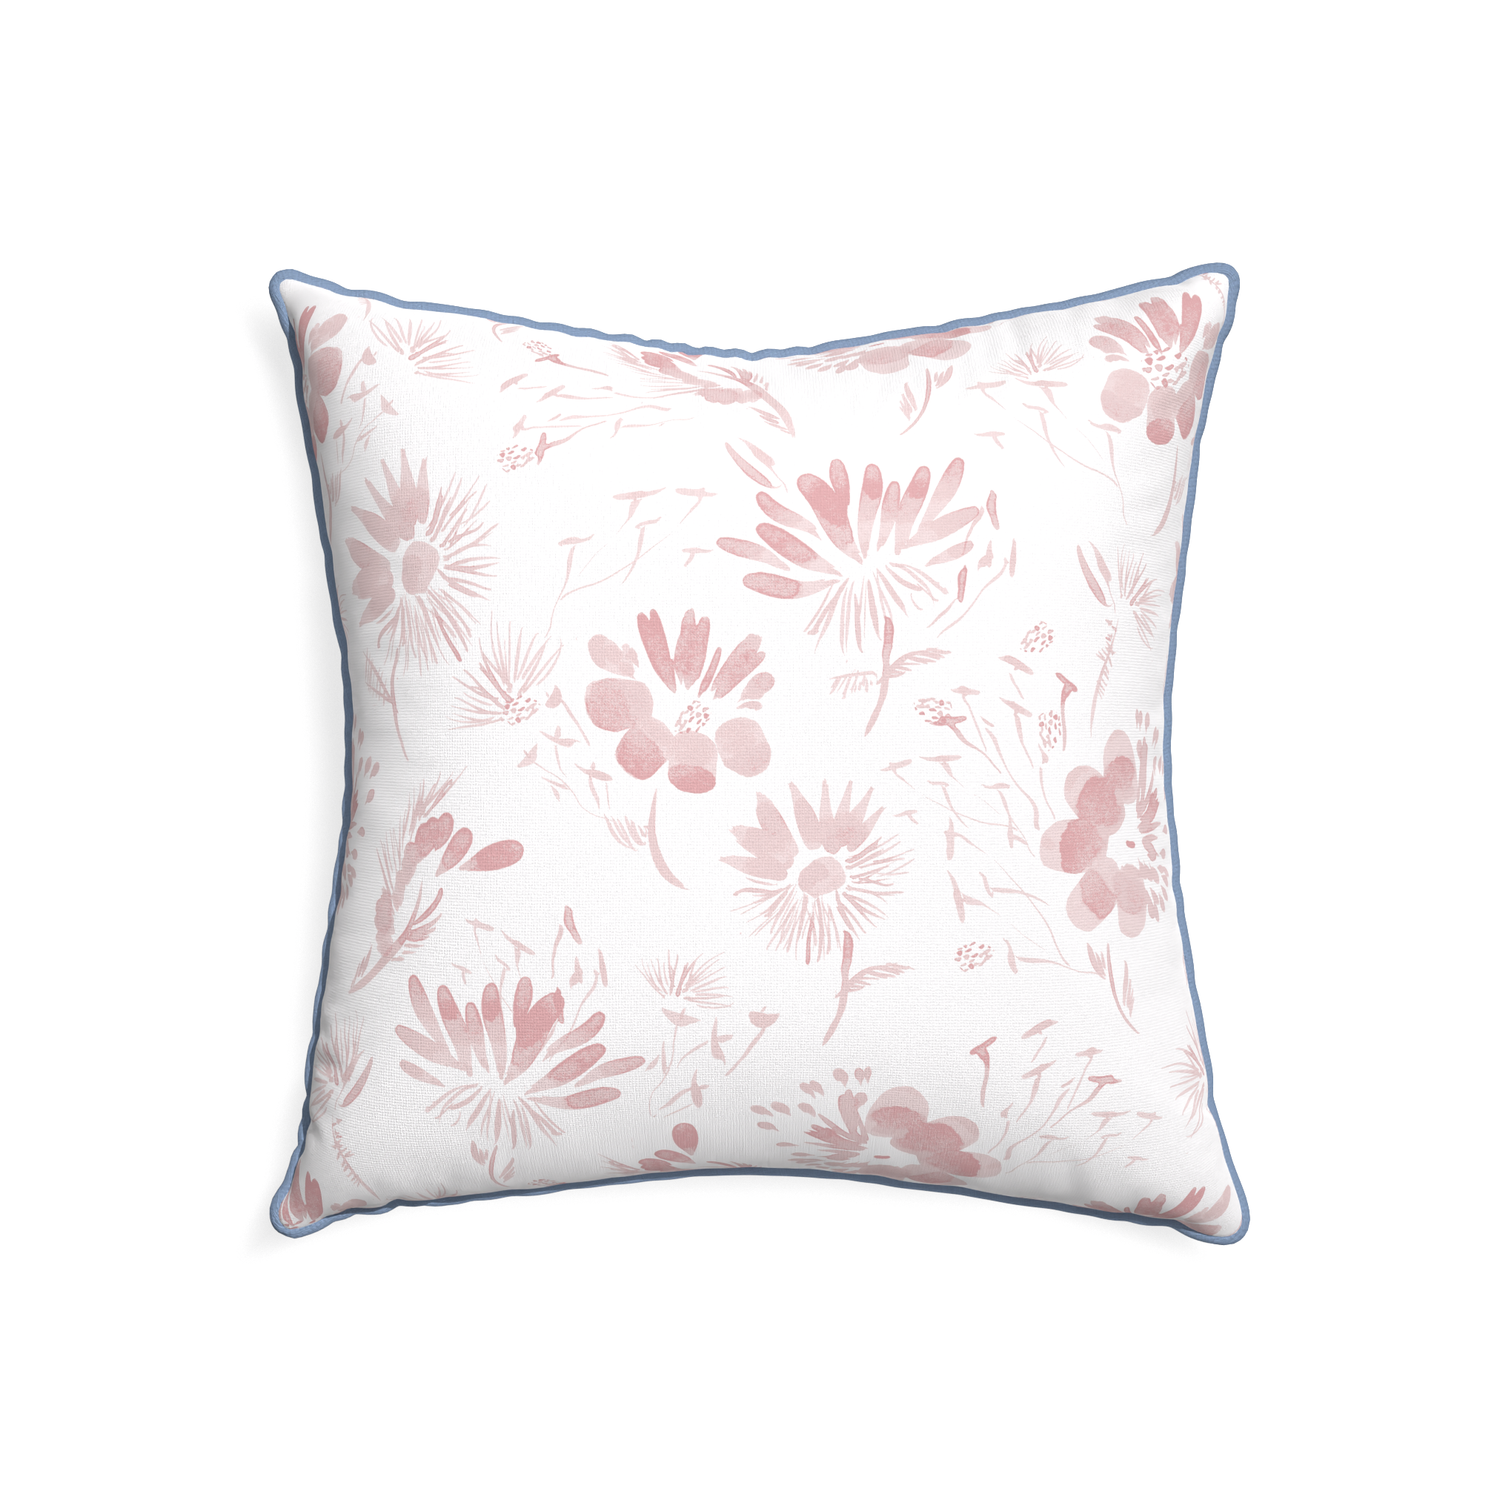 22-square blake custom pink floralpillow with sky piping on white background